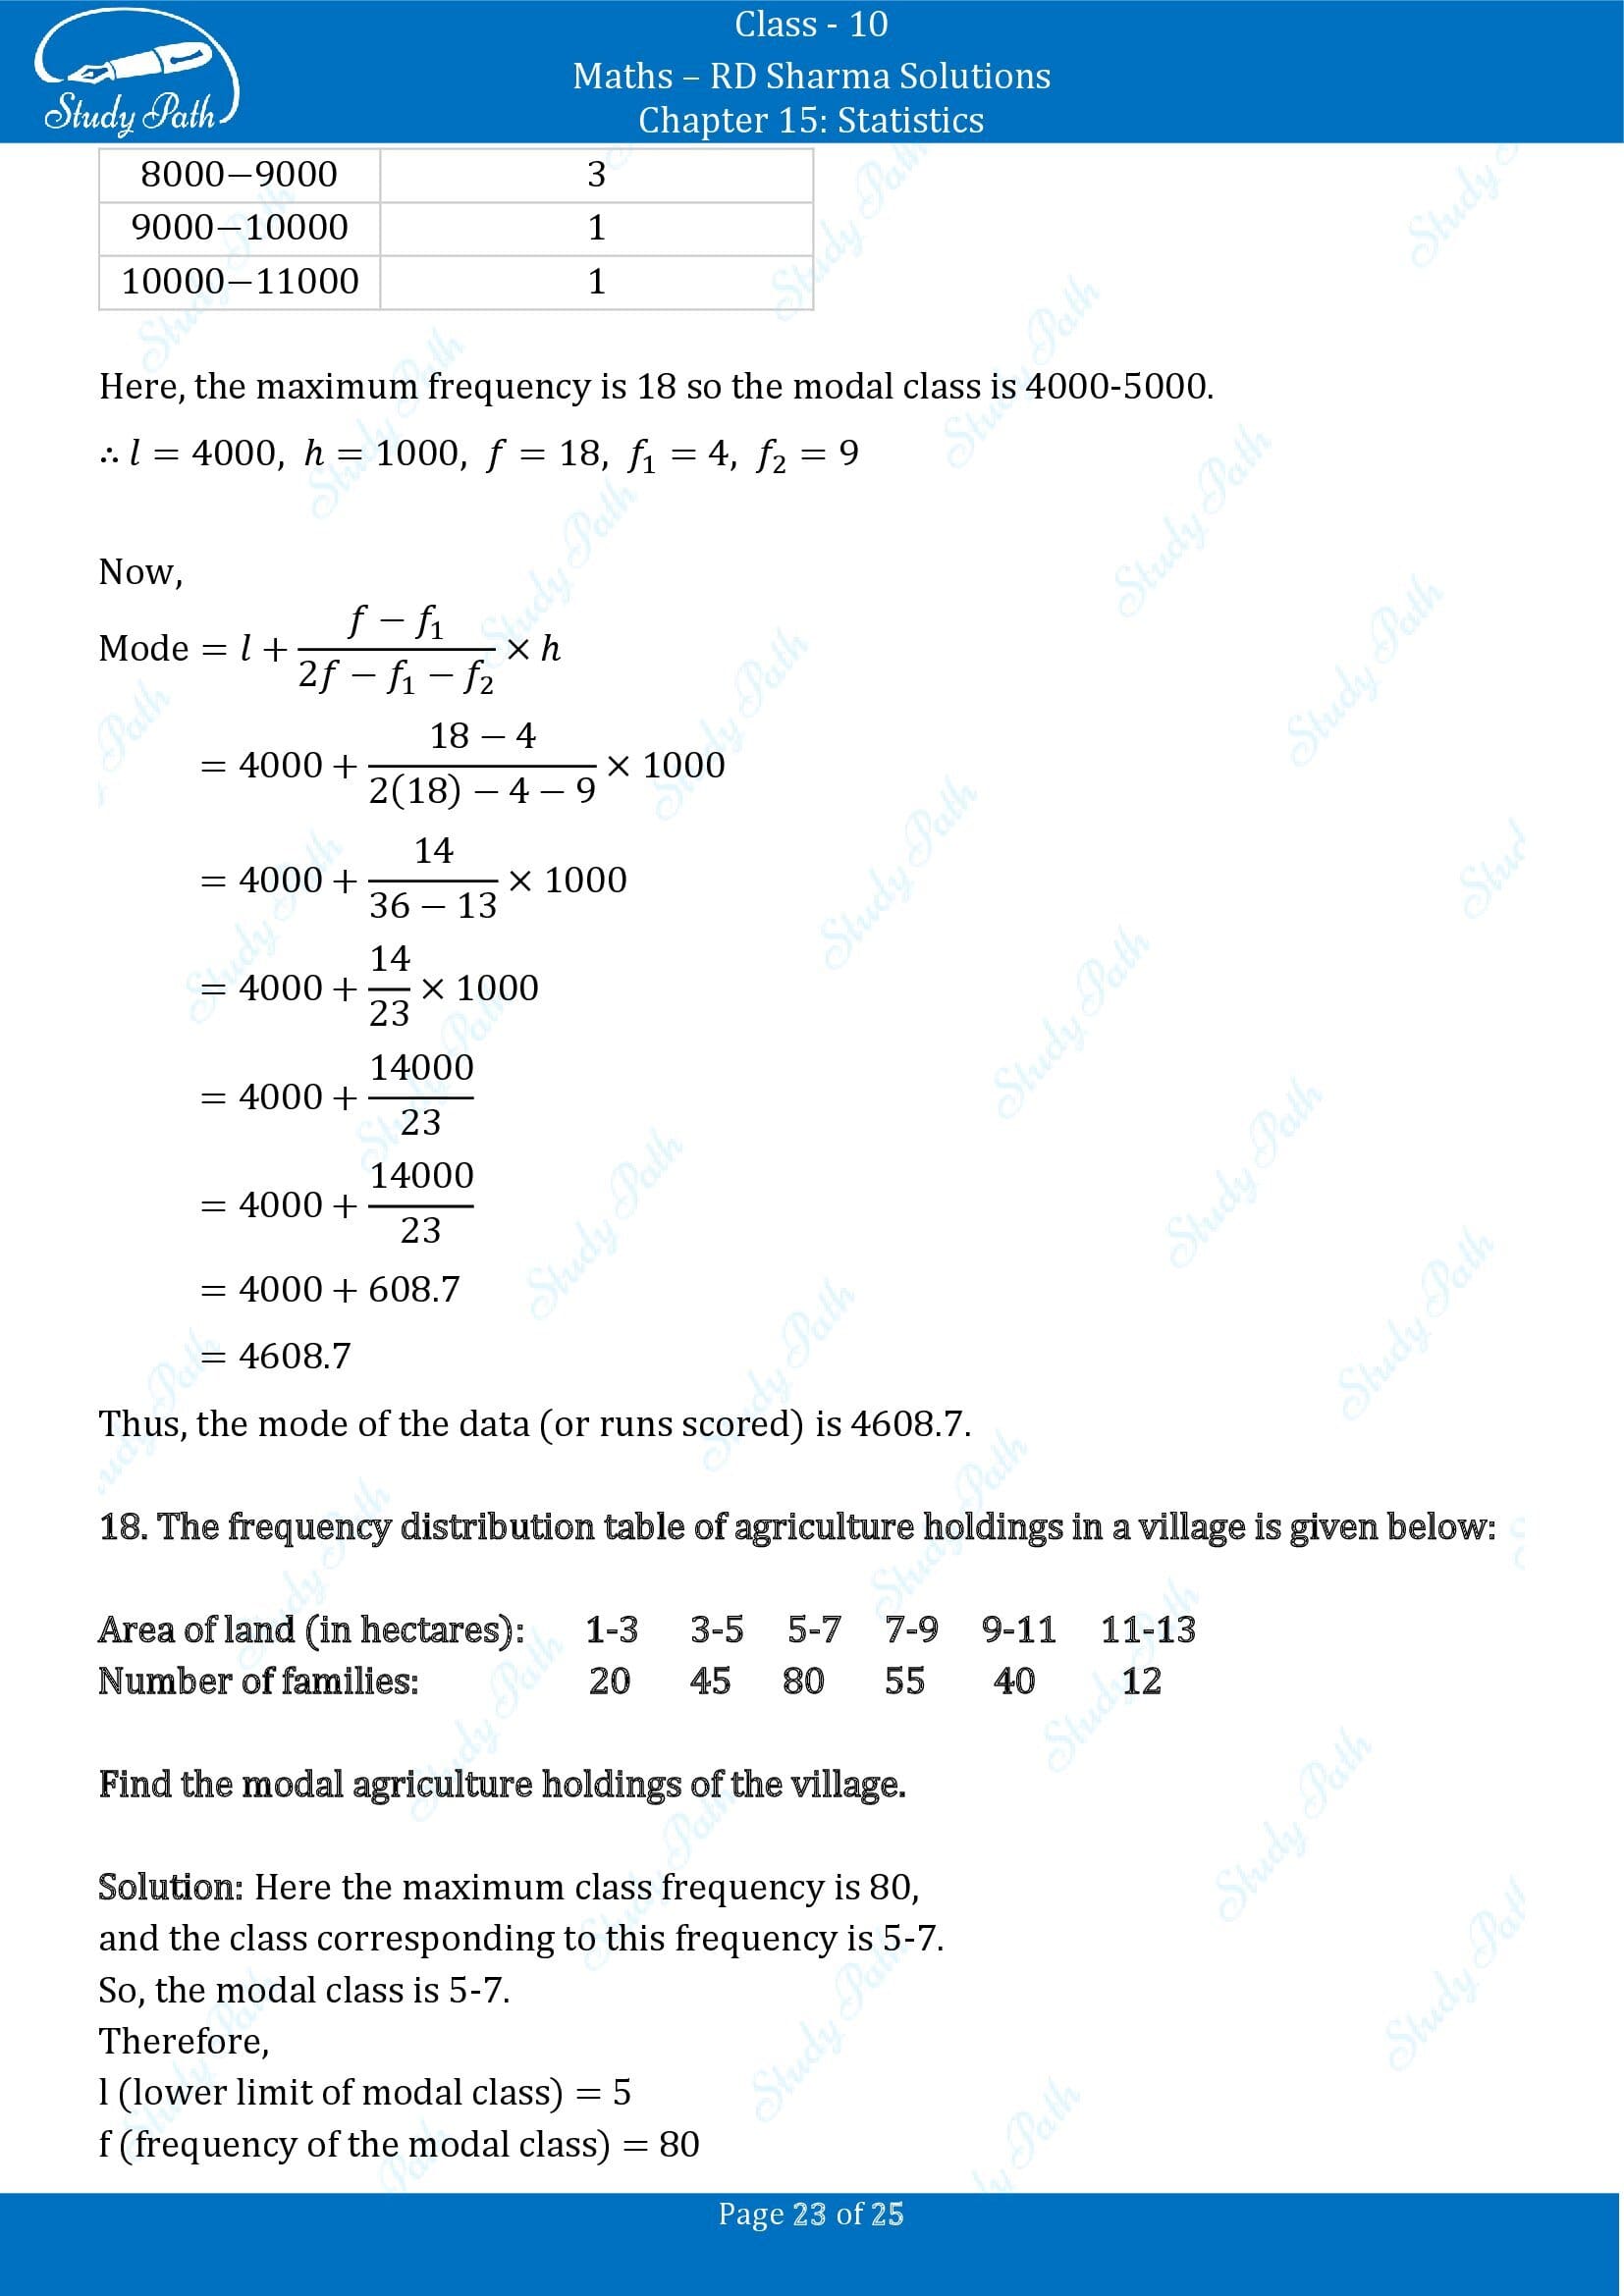 RD Sharma Solutions Class 10 Chapter 15 Statistics Exercise 15.5 00023